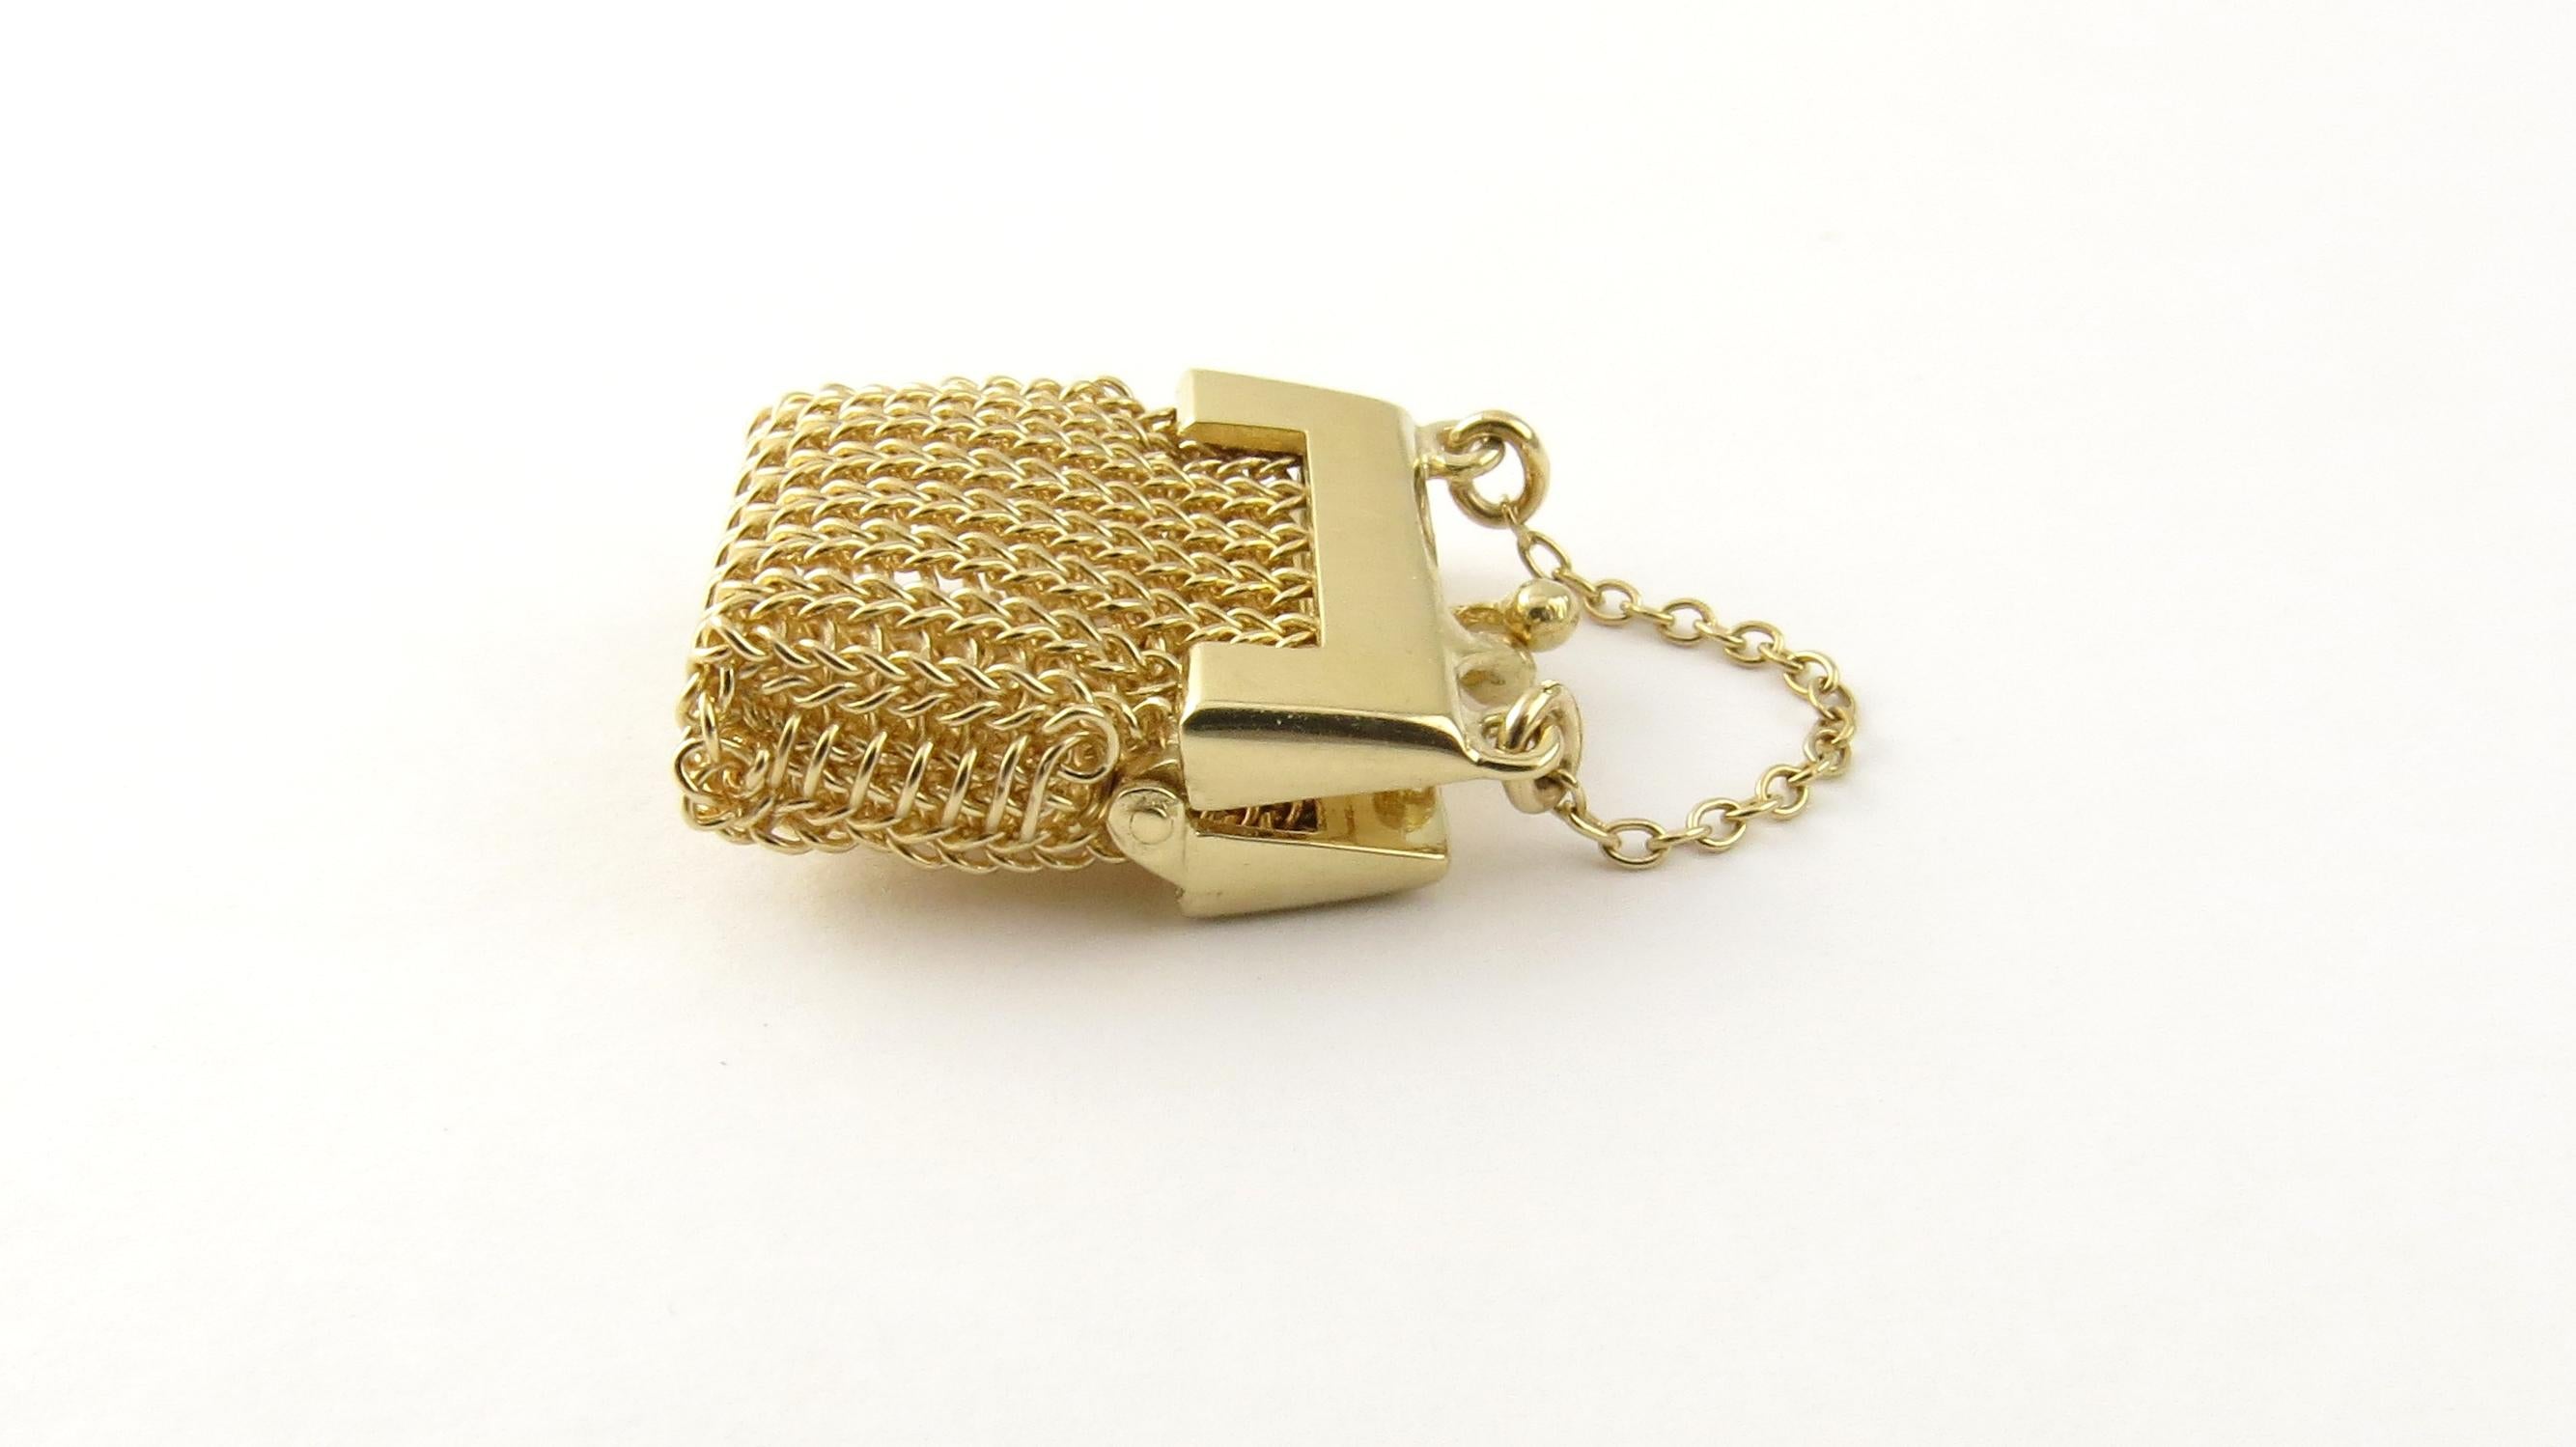 Vintage 14 Karat Yellow Gold Mesh Change Purse Pendant

This stunning framed change purse is beautifully detailed in a classic 14K gold mesh link design. Suspended from a 19 mm gold chain.

Size: 24 mm x 18 mm

Weight: 3.9 dwt. / 6.1 gr.

Stamped: